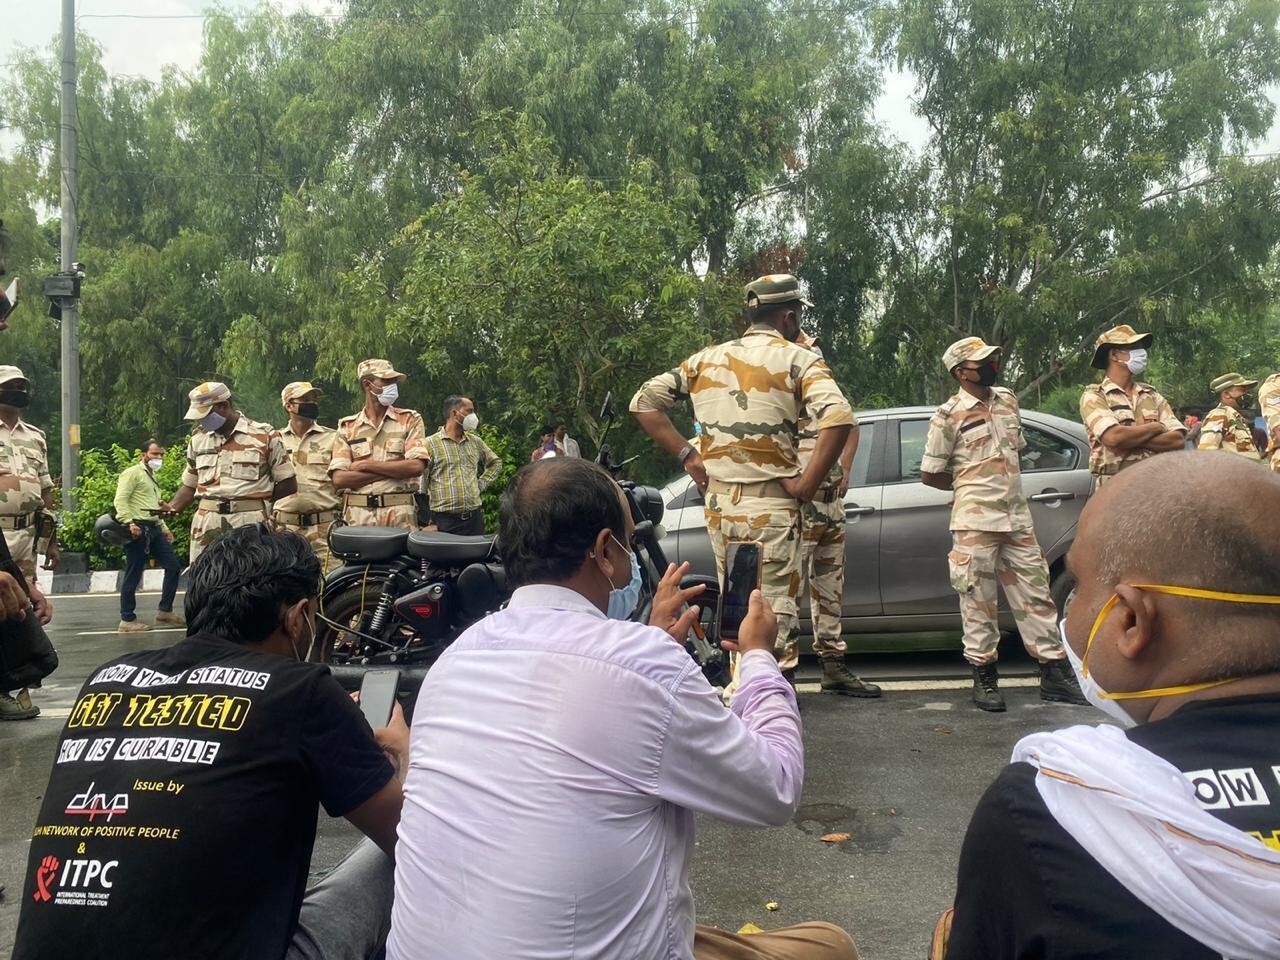 Delhi paramilitary personnel arrive at a protest held by the Delhi Network of Positive People (DNP+) – a group of people and advocates who live with HIV – outside a hepatitis clinic. Photo: Handout